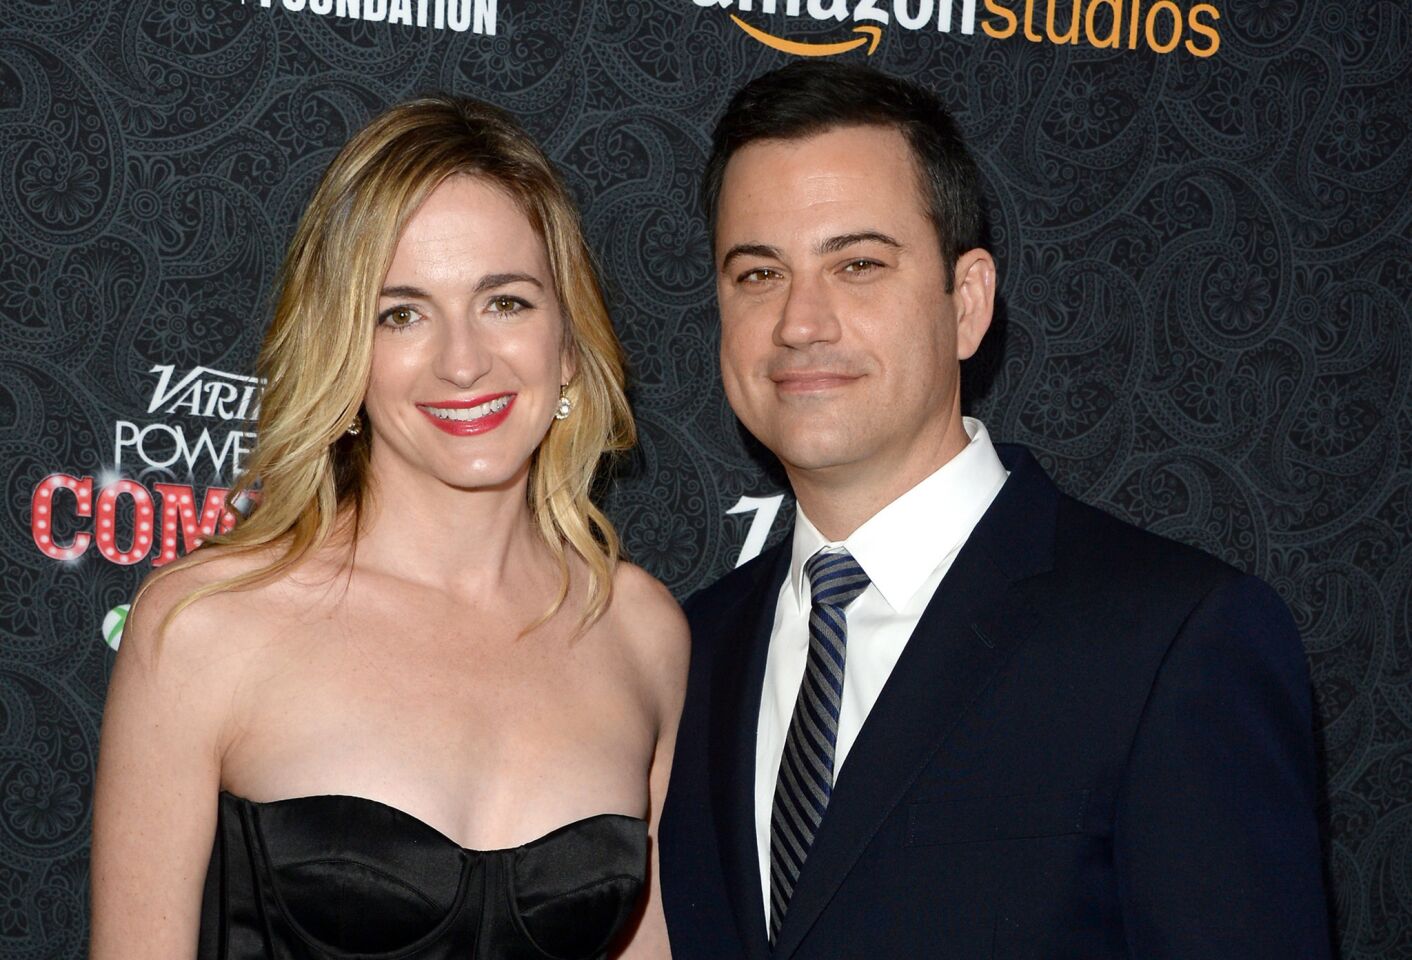 Jimmy Kimmel and wife Molly McNearney welcomed their first child together, a girl named Jane. The pair, who chose not to find out the sex of the baby before delivery, began dating in 2009 and tied the knot in July 2013.